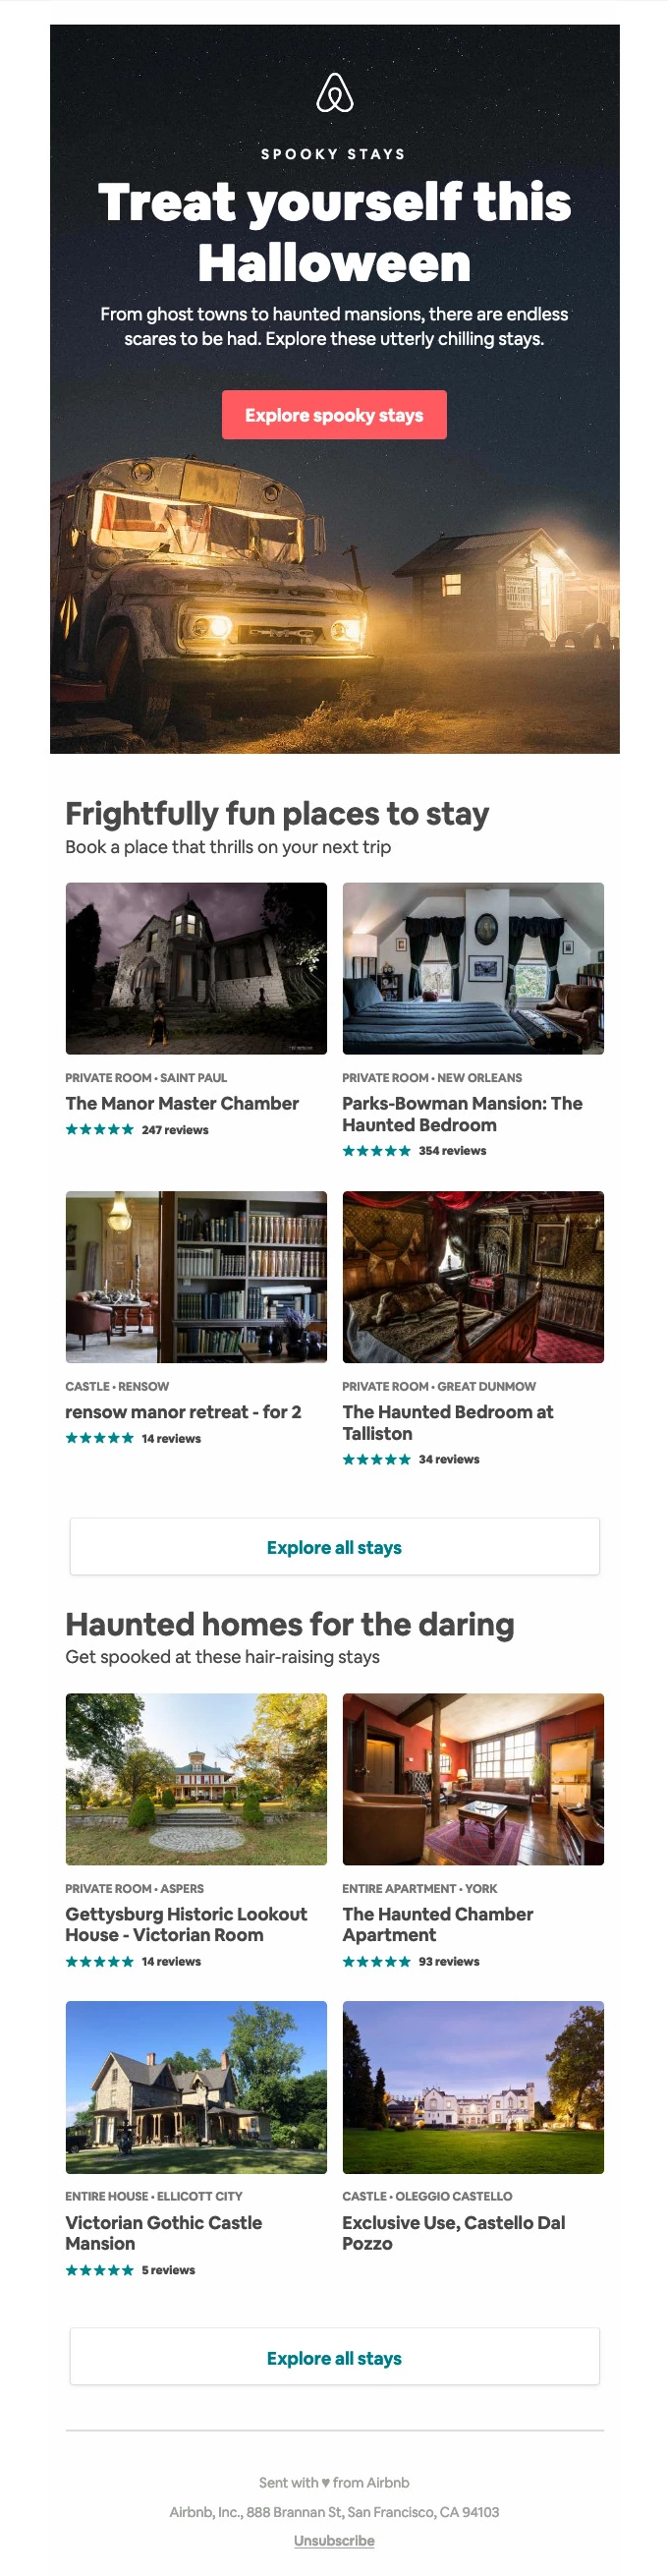 airbnb halloween newsletter with suggestions for spooky stays and experiences